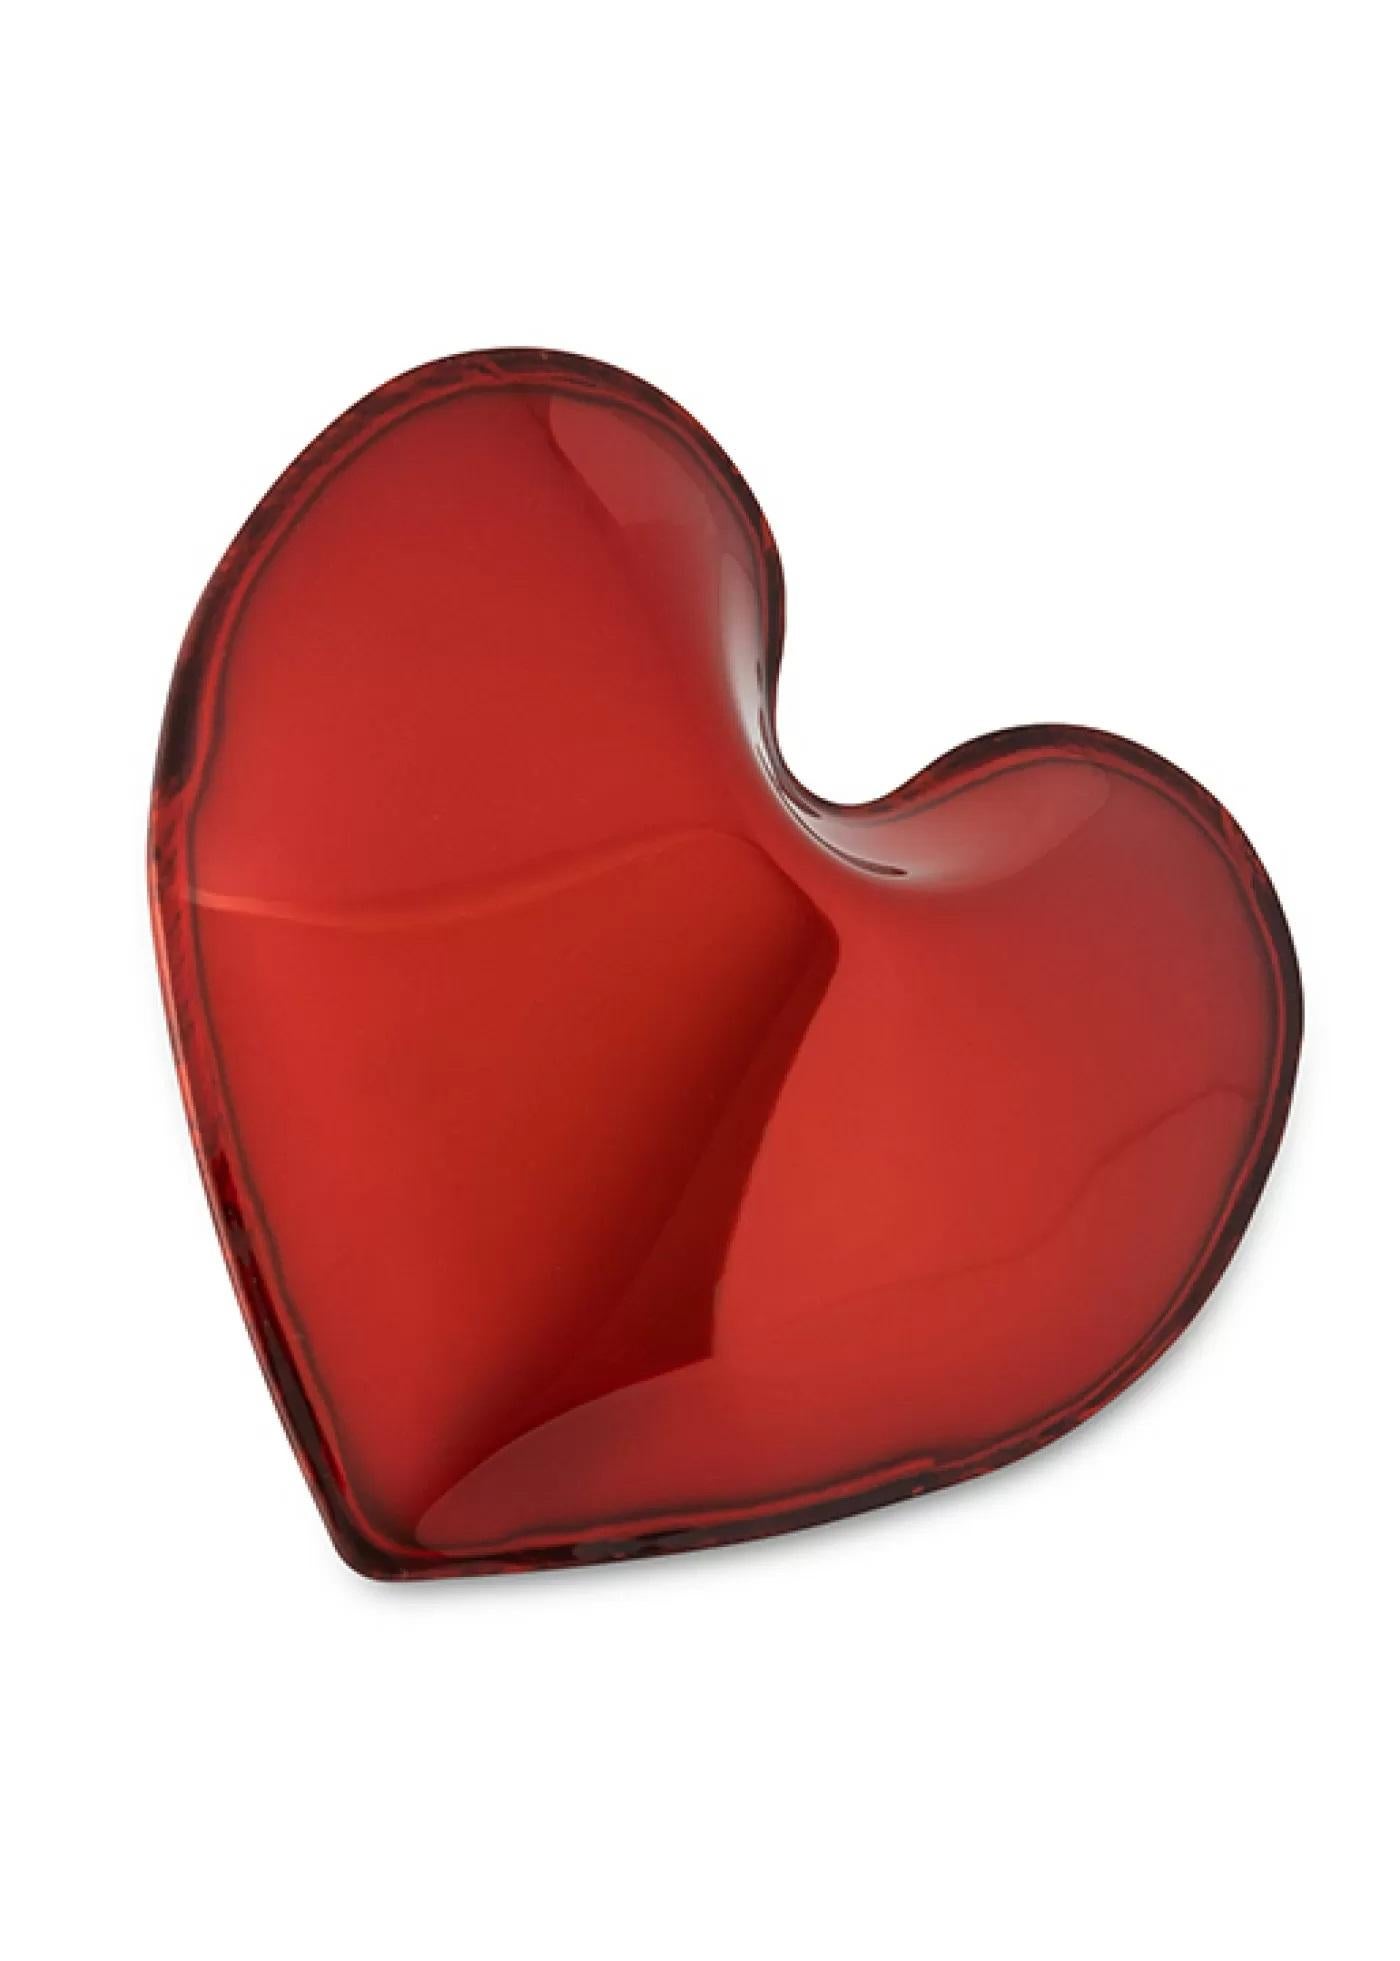 Set of 2 True Red Heart Inflated Hangers by Zieta
Dimensions: Ø 10 x D 2 cm.
Materials: True red carbon steel.

Growing love 
Heart combines art and heat. A tiny DIY object that reveals its magical features when immersed in warmth. It offers a